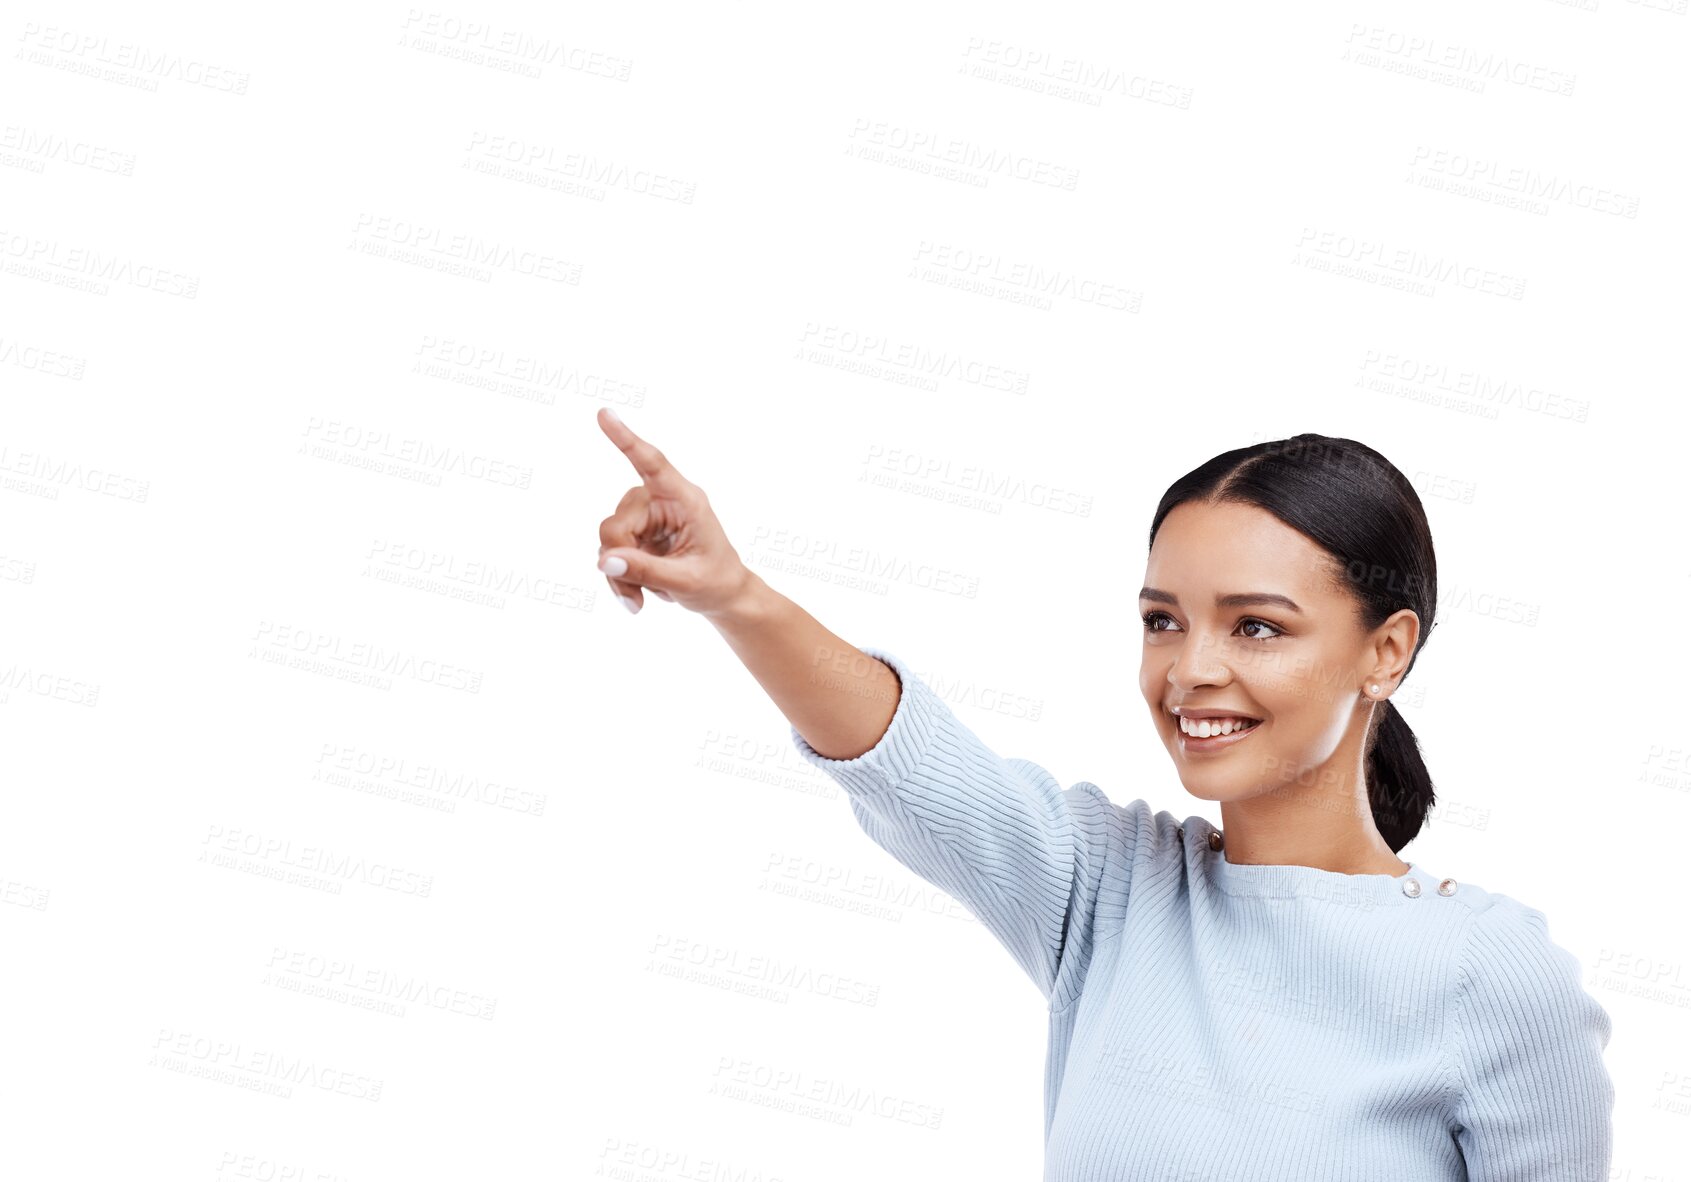 Buy stock photo Pointing, presentation or happy girl with sale offer, retail promotion or discount deal isolated on png. Transparent background, smile or woman showing information, choice or advertising announcement